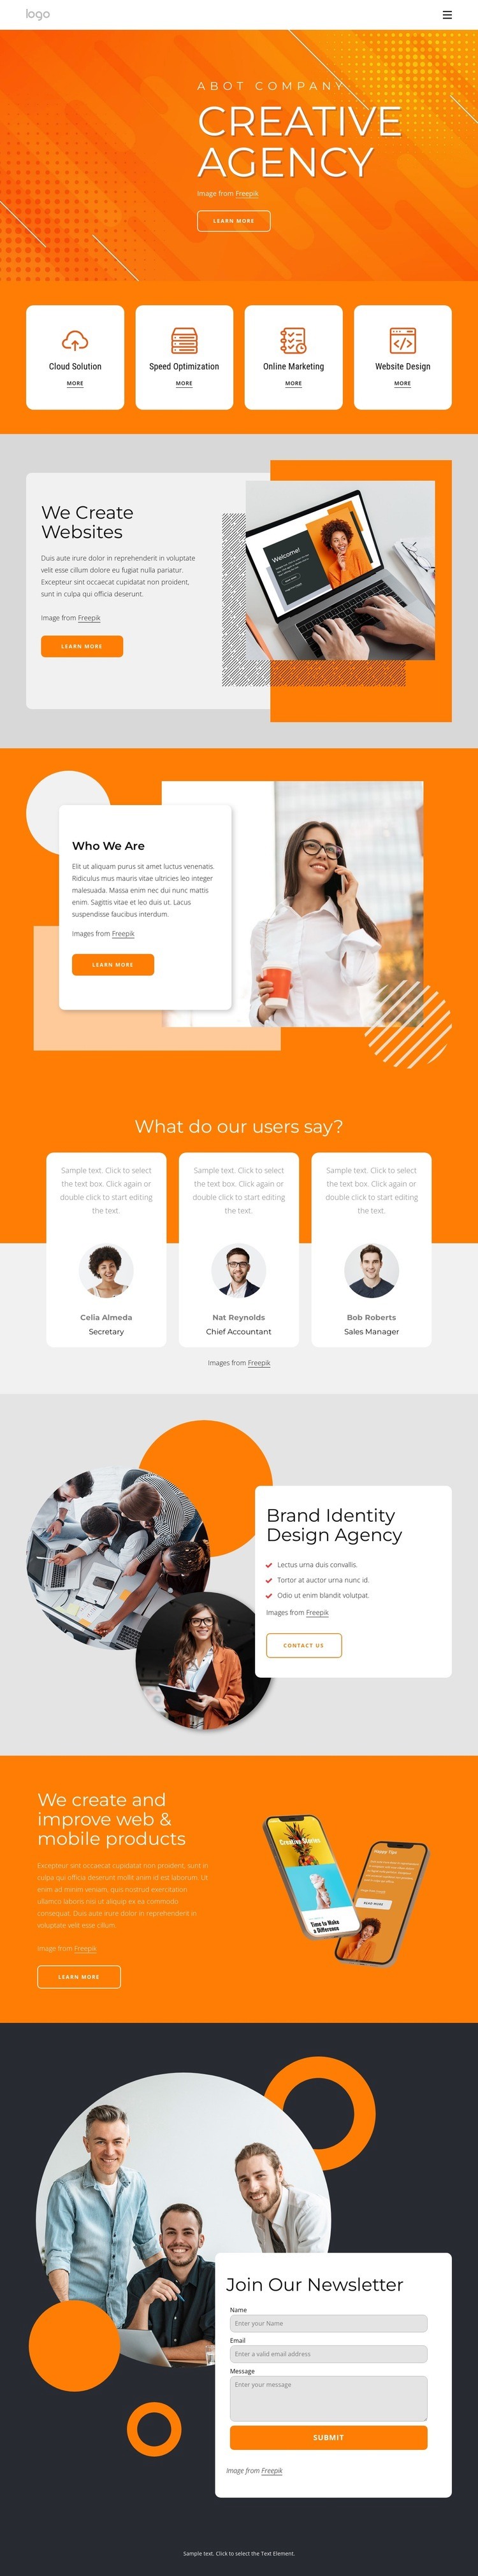 The creative agency for your next big thing Homepage Design